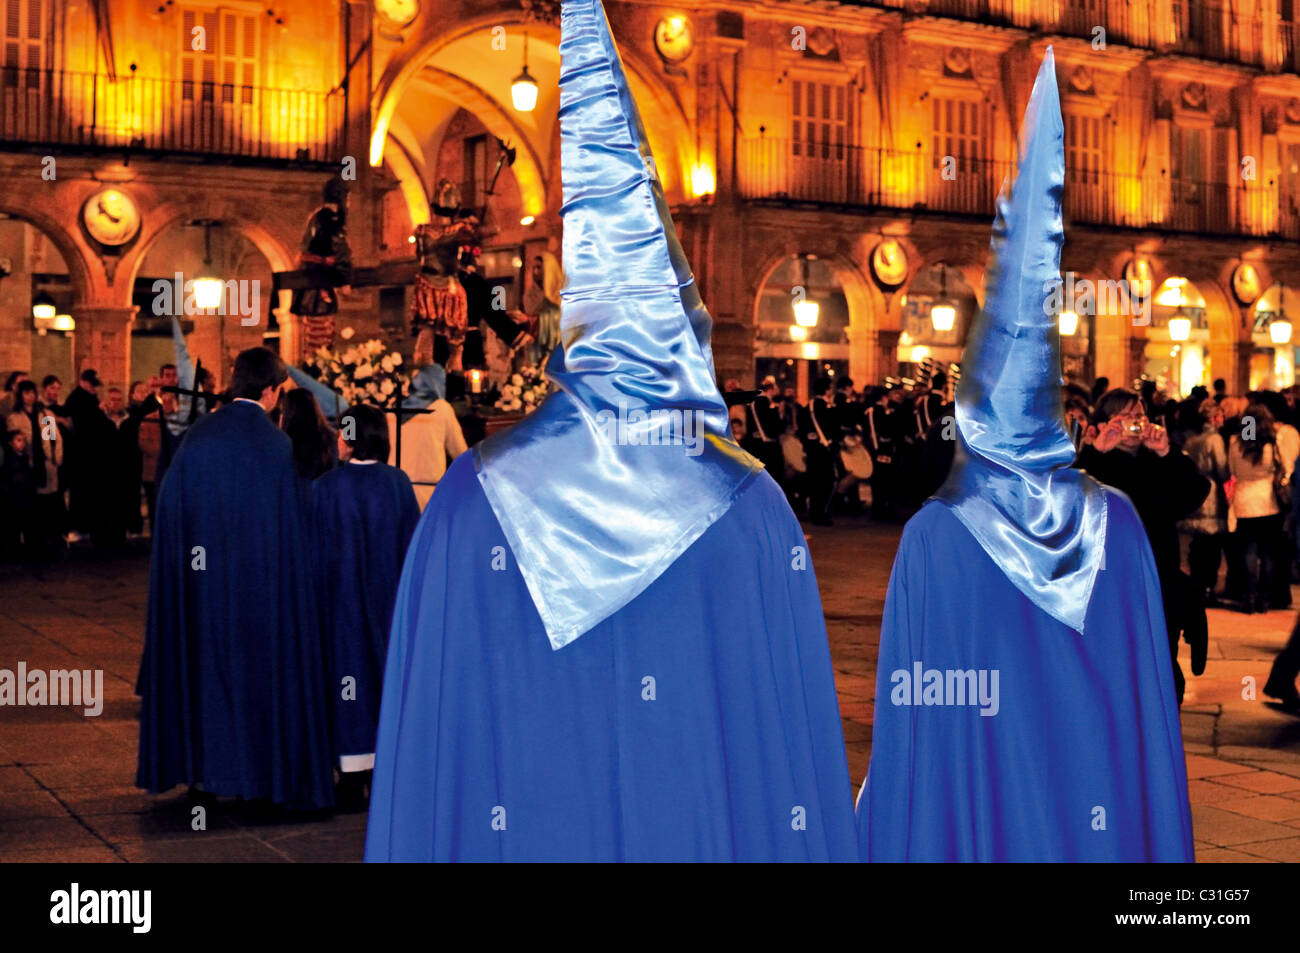 Spain, Salamanca: Nocturnal Easter Friday Procession passing the Plaza Mayor square Stock Photo